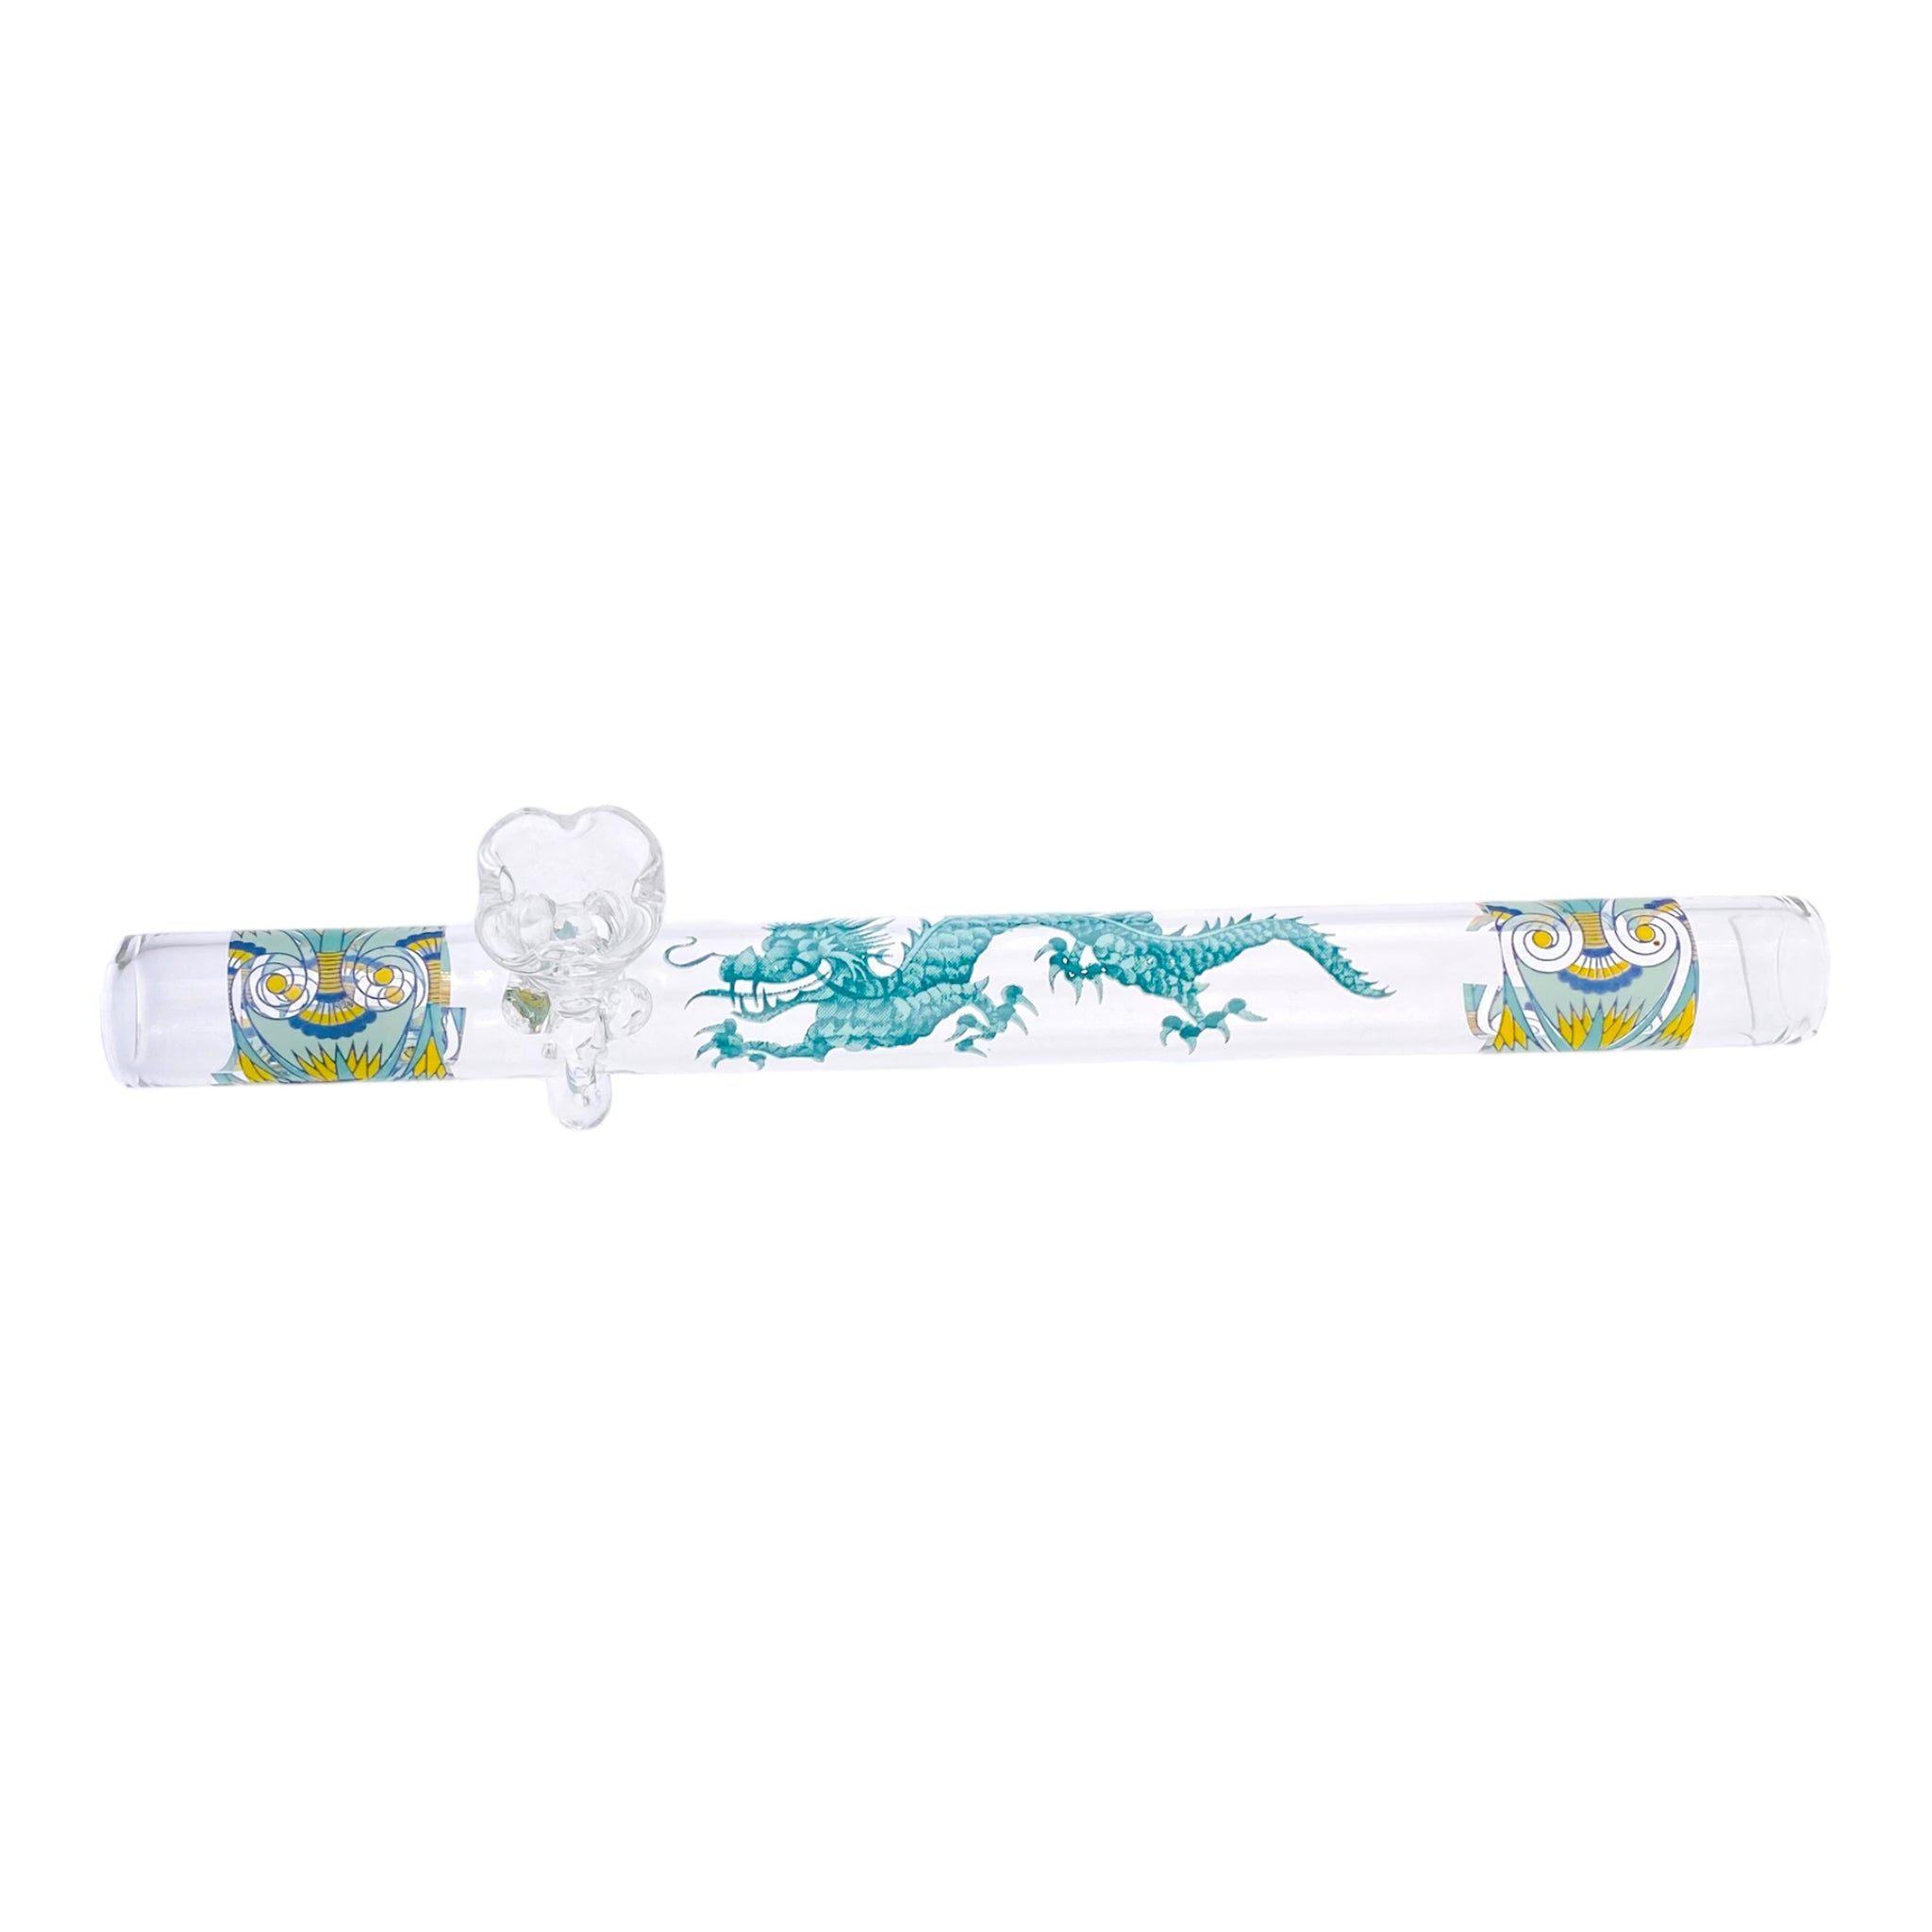 8 inch Clear Steamroller With Skull And Snake